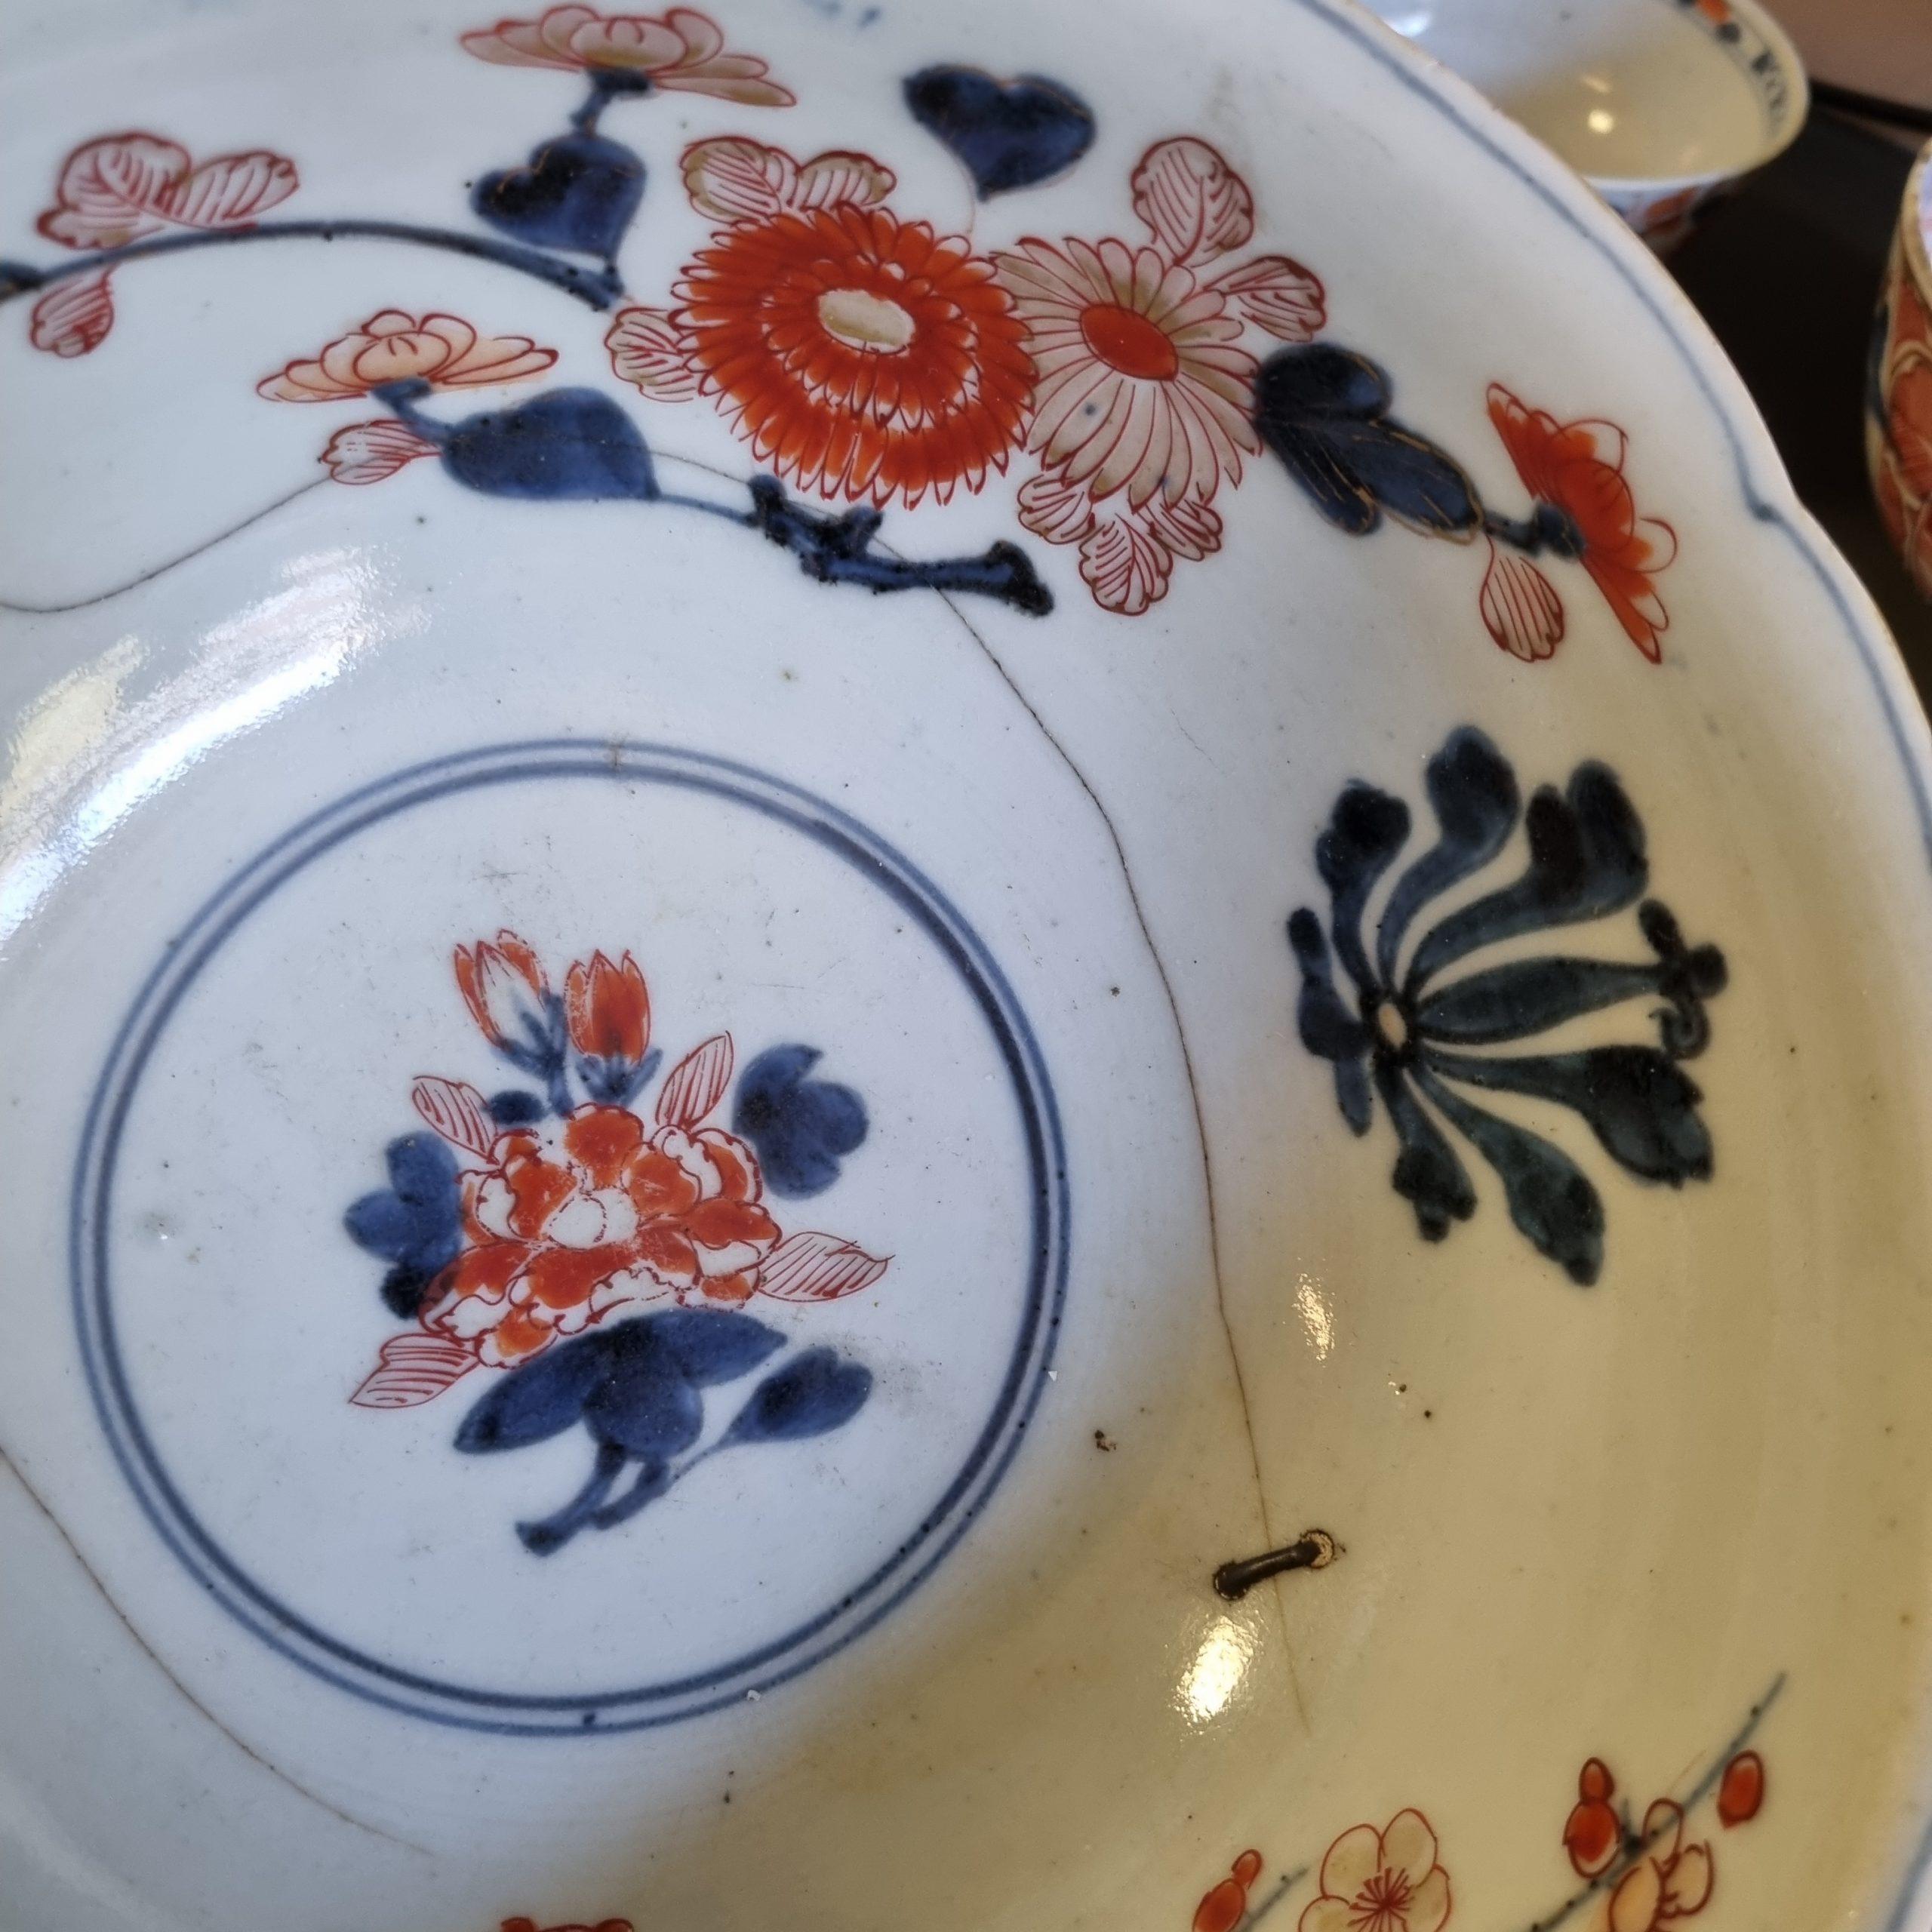 Nice Edo period bowl with lotus flowers and old cramm restorarion. very cool!

Additional information:
Material: Porcelain & Pottery
Category: Imari
Region of Origin: Japan
Period: 18th century
Age: Pre-1800
Condition: Line selection over large part